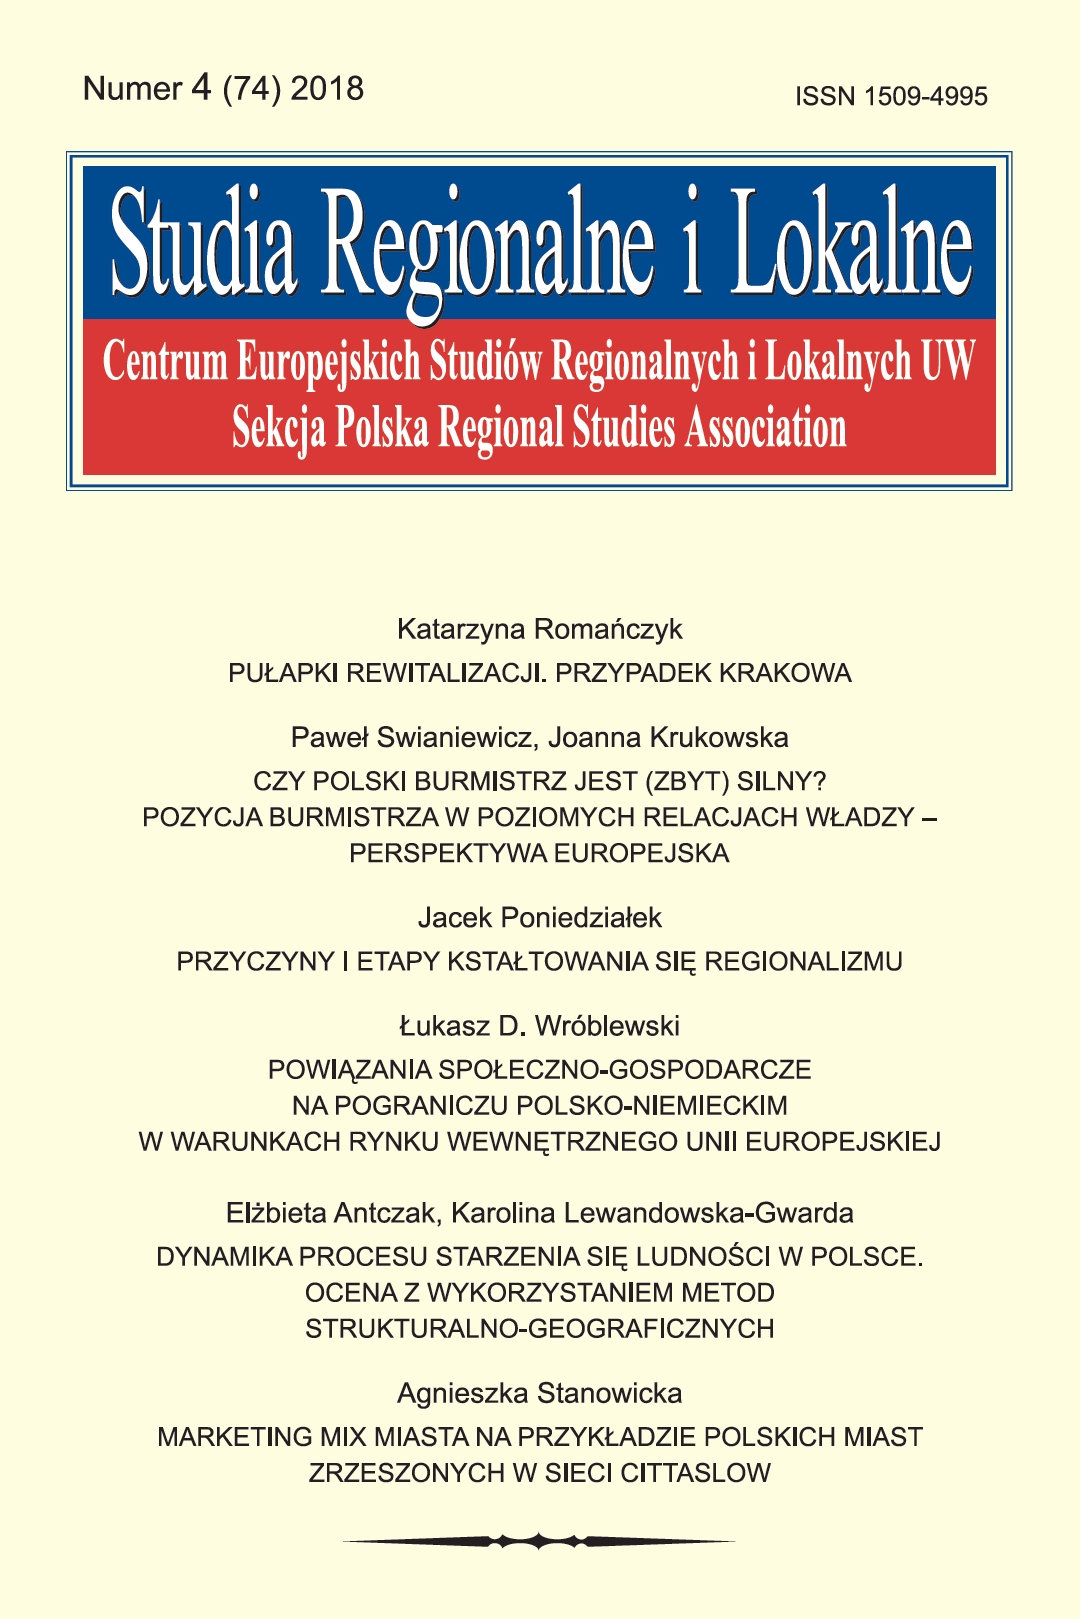 Causes and stages of regionalism formation